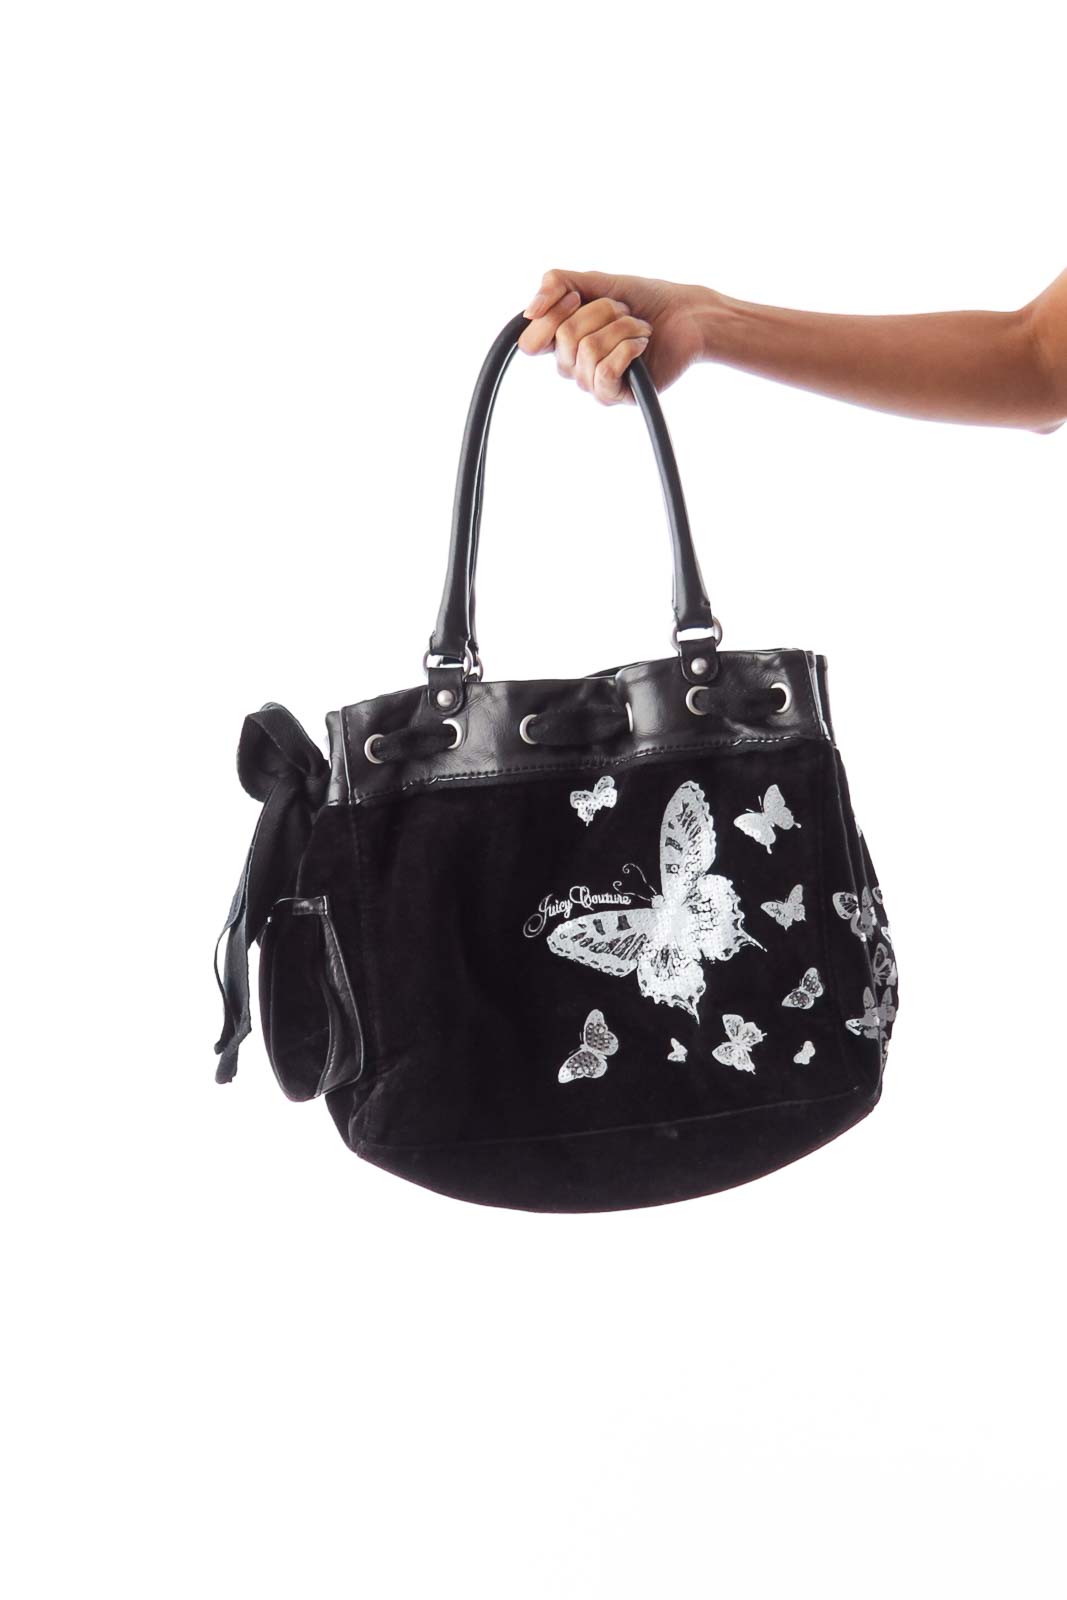 Buy Latest Juicy Couture Bags online in India at Sale Price